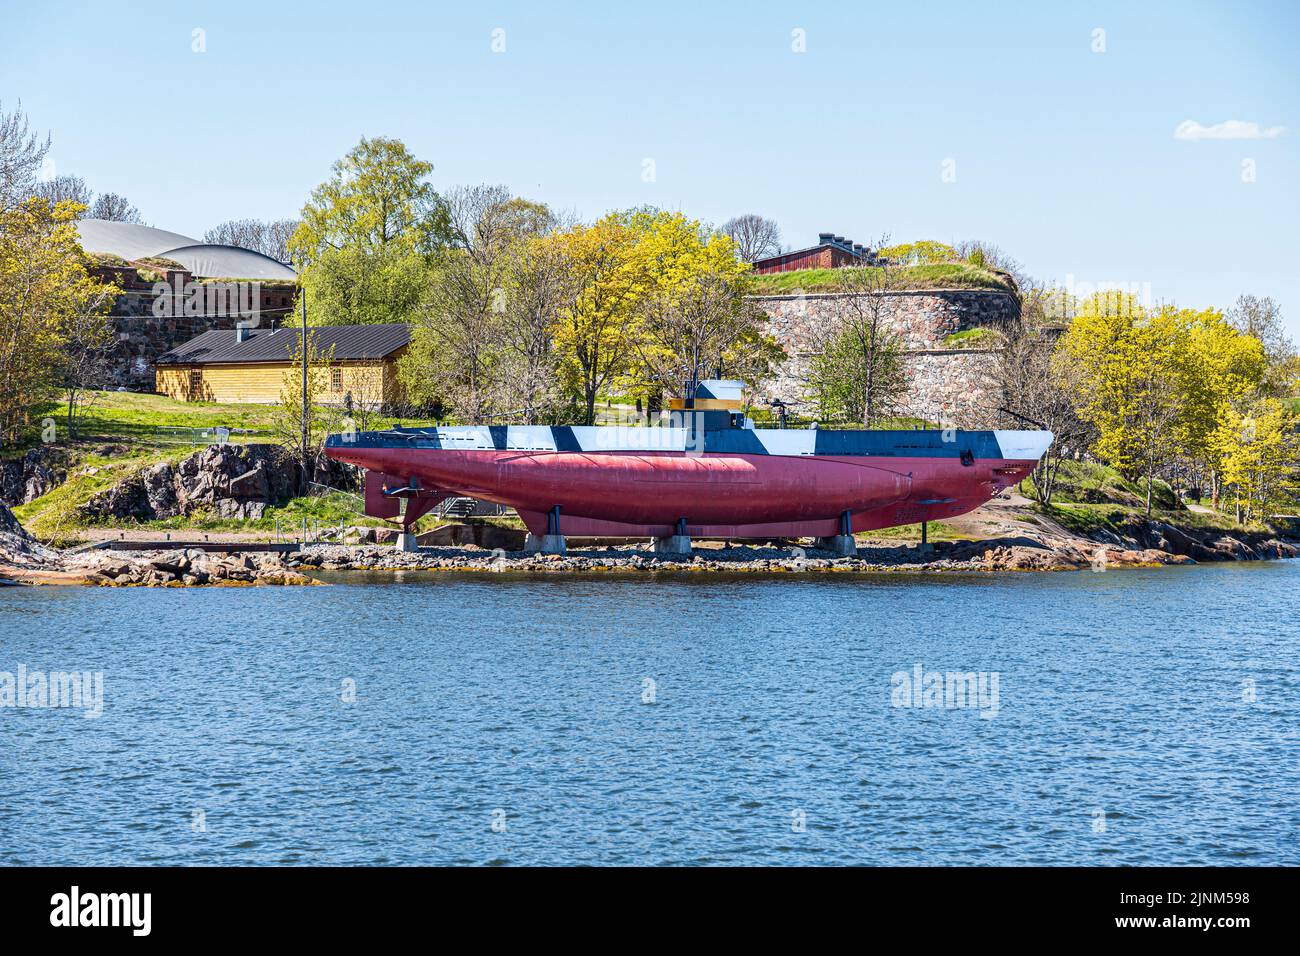 The Finnish submarine Vesikko launched in 1933 - now a museum on the island of Suomenlinna off Helsinki, Finland Stock Photo